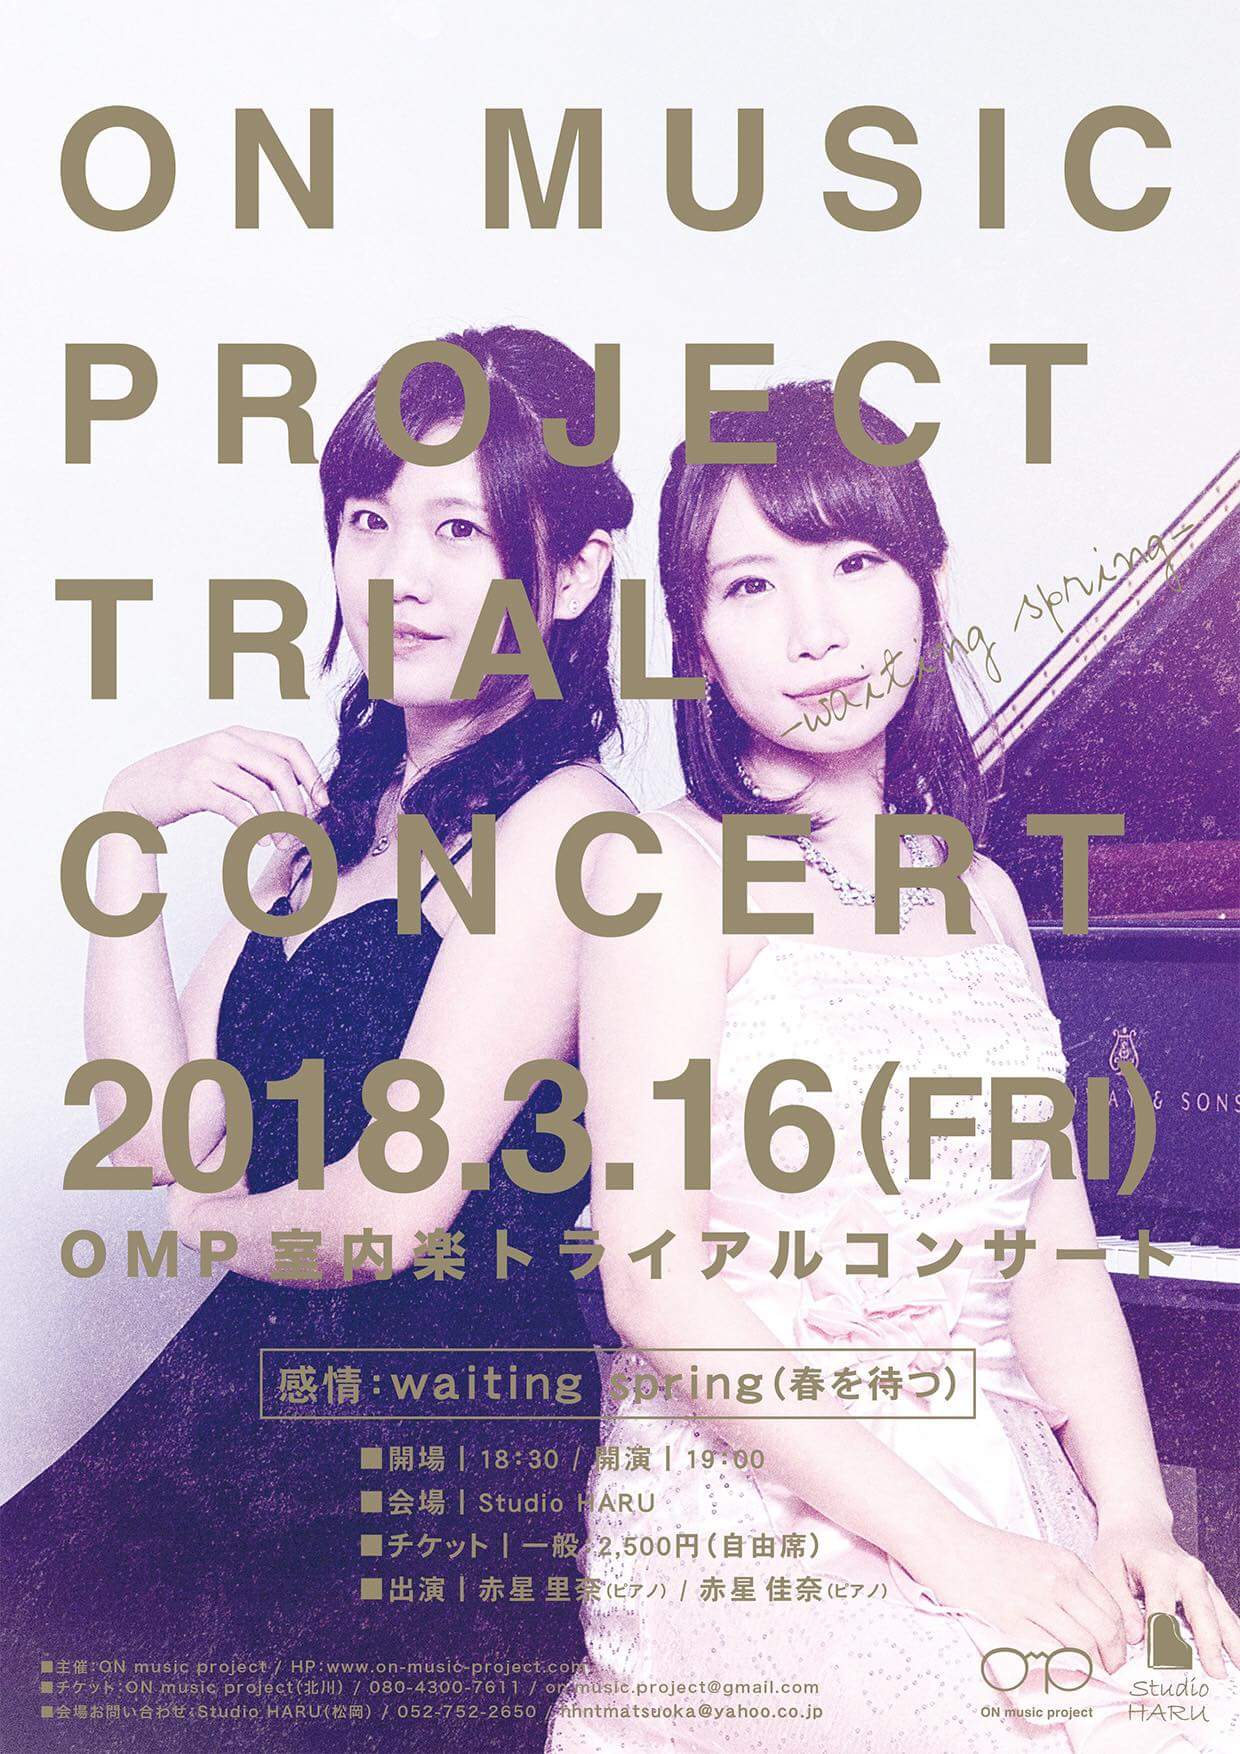 On Music Project Trial Concert